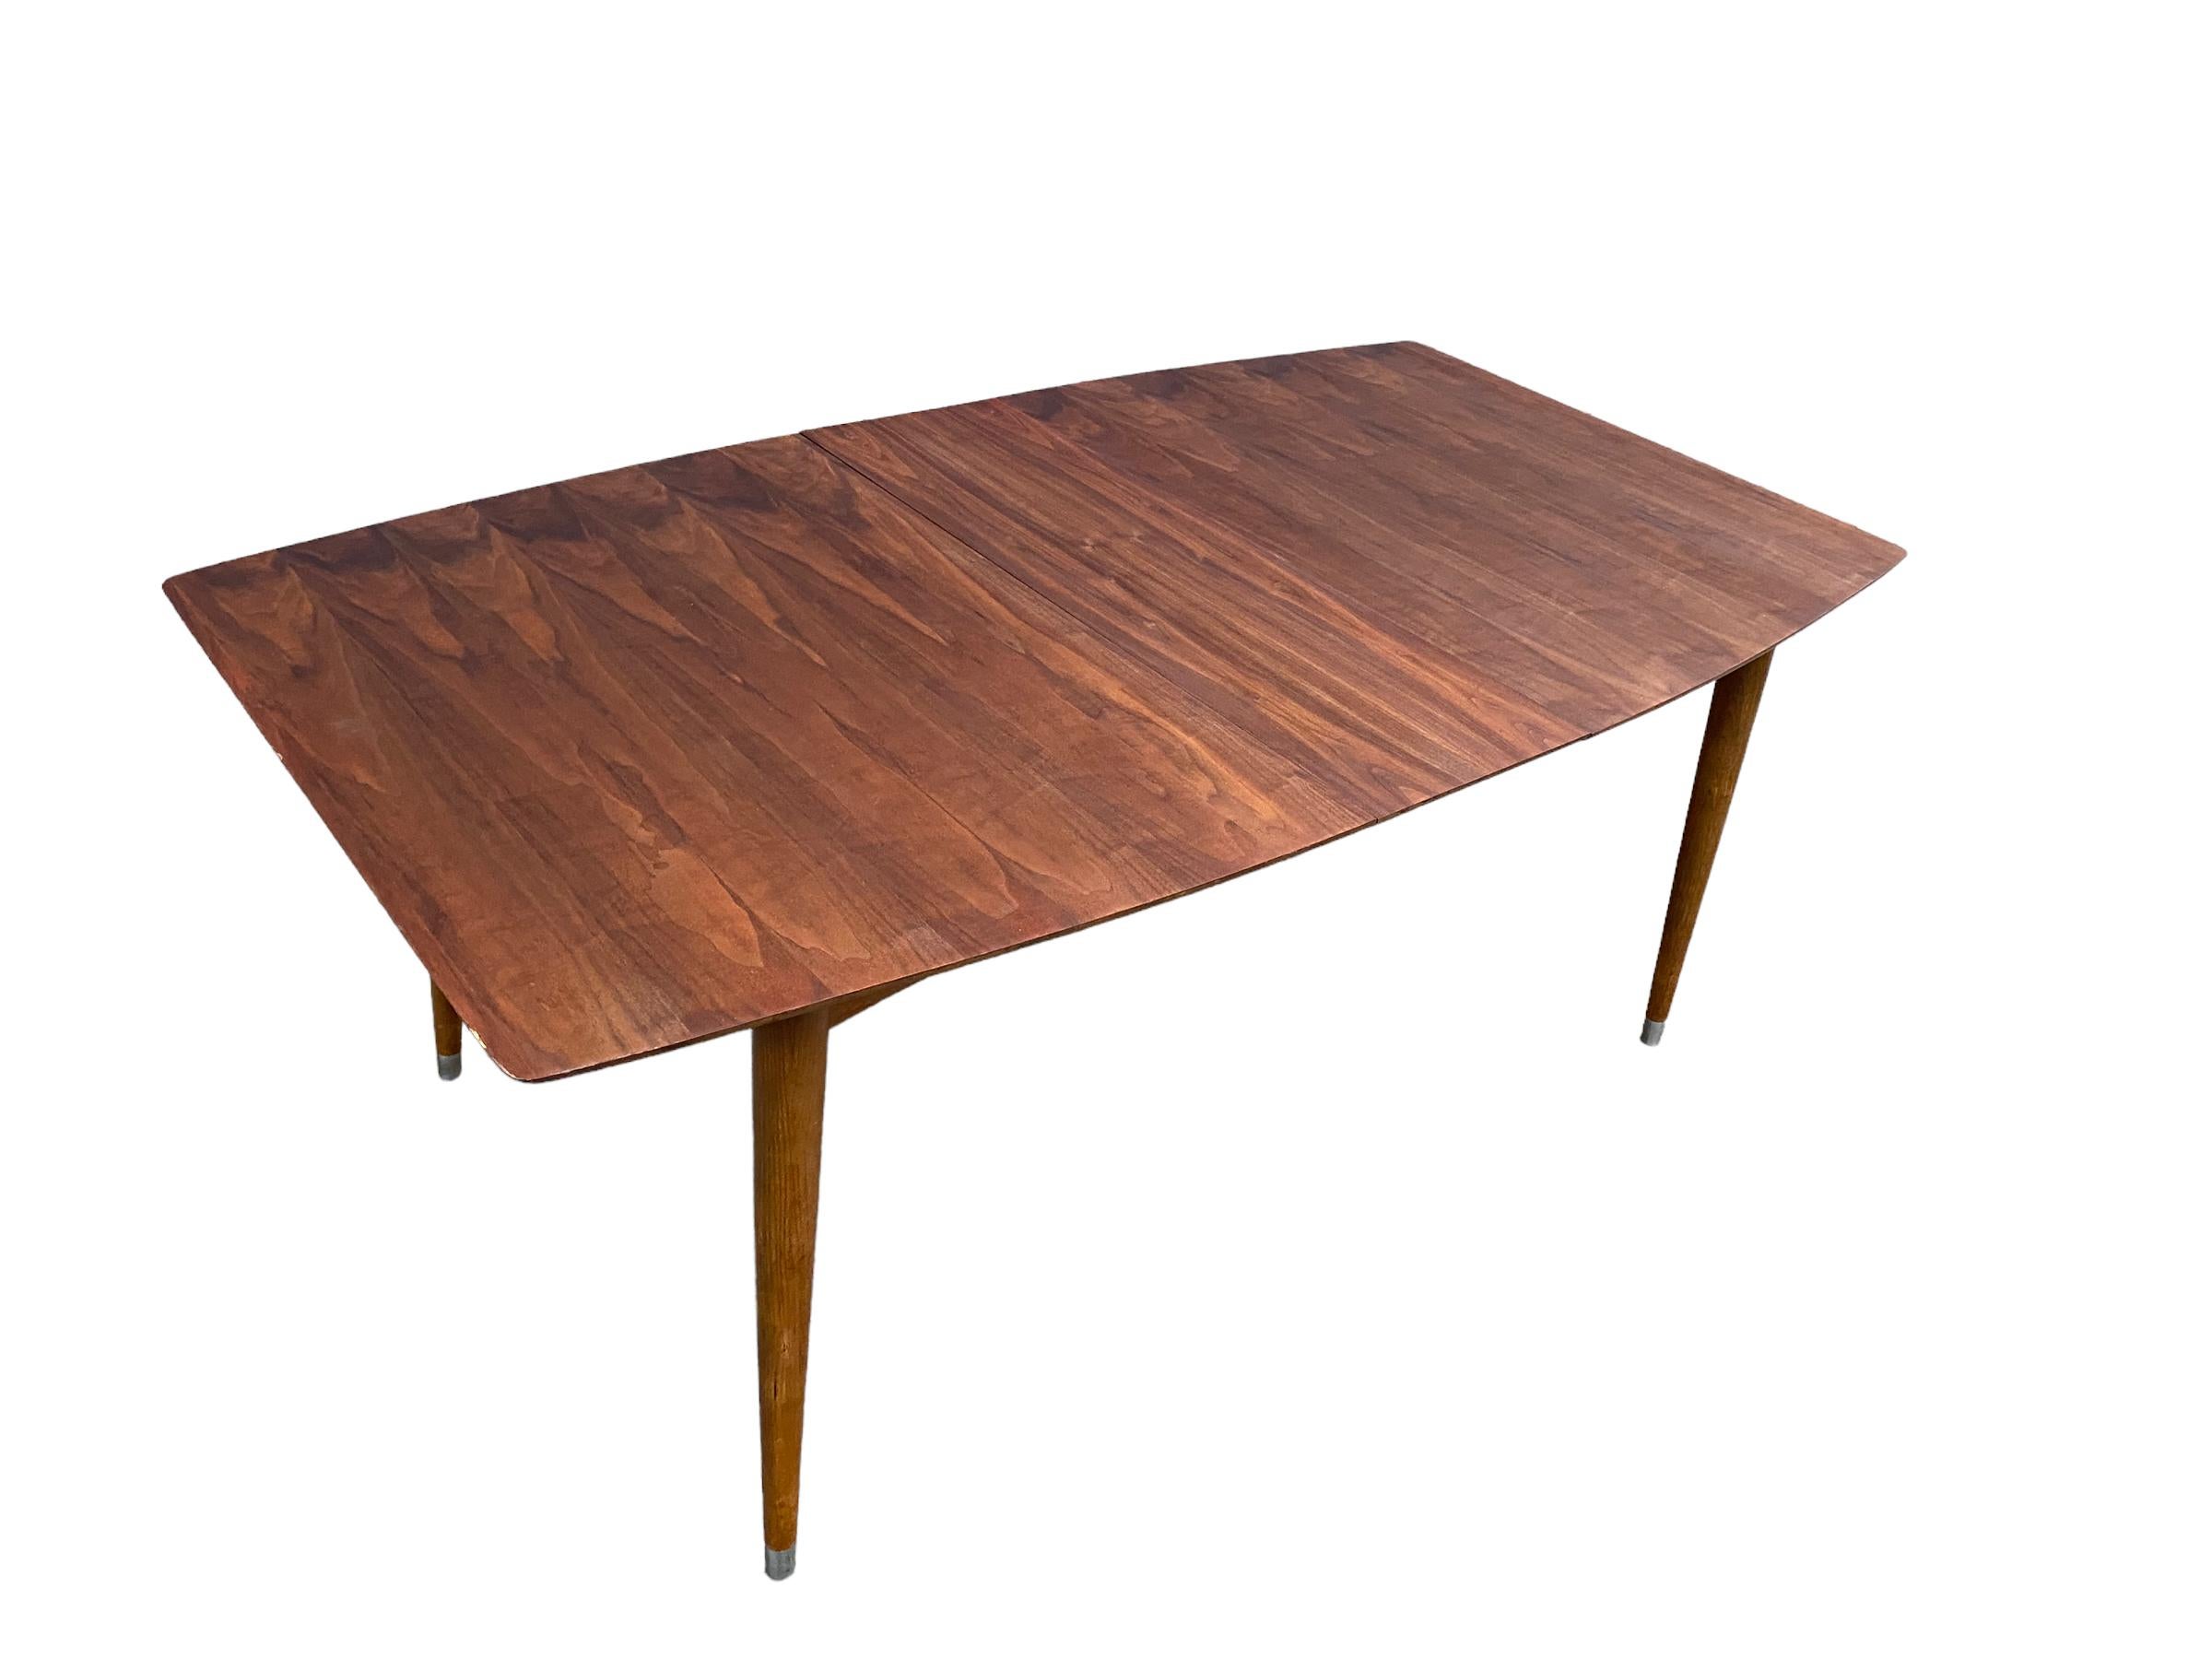 American modern walnut dining table with three leaves. Excellent wood grain on surfboard and tapered legs with metal caps. Made by Mengel Furniture Co. of Louisville, Kentucky. Measures 60” long by 40” wide. Each leaf adds 12” for a maximum length